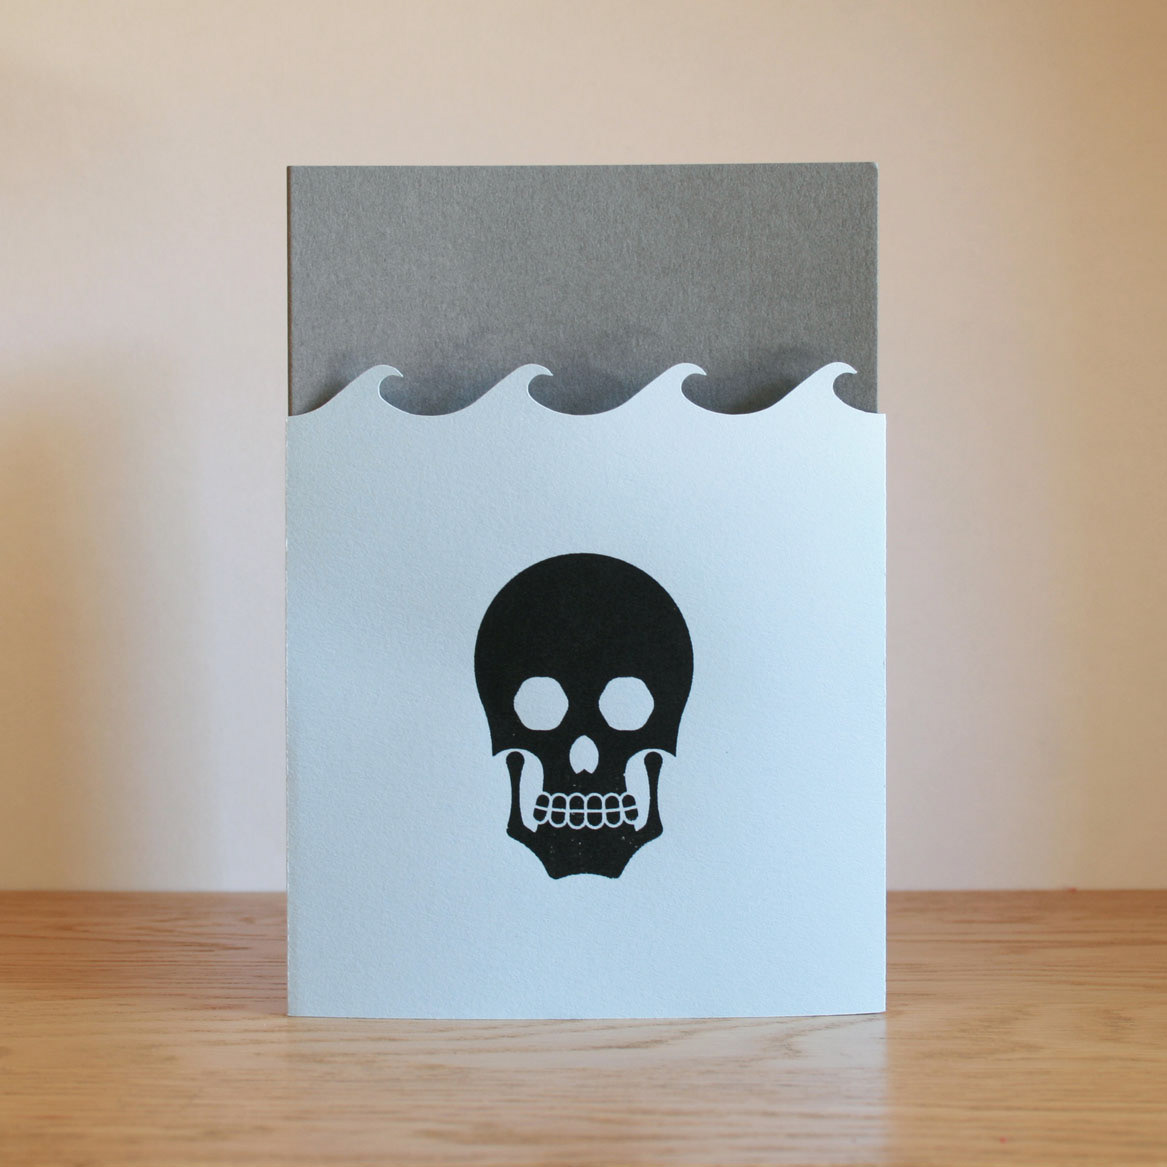 Stuart Daly spring once more nautical anchor mermaid lighthouse Rum skull wave paper cut greeting cards